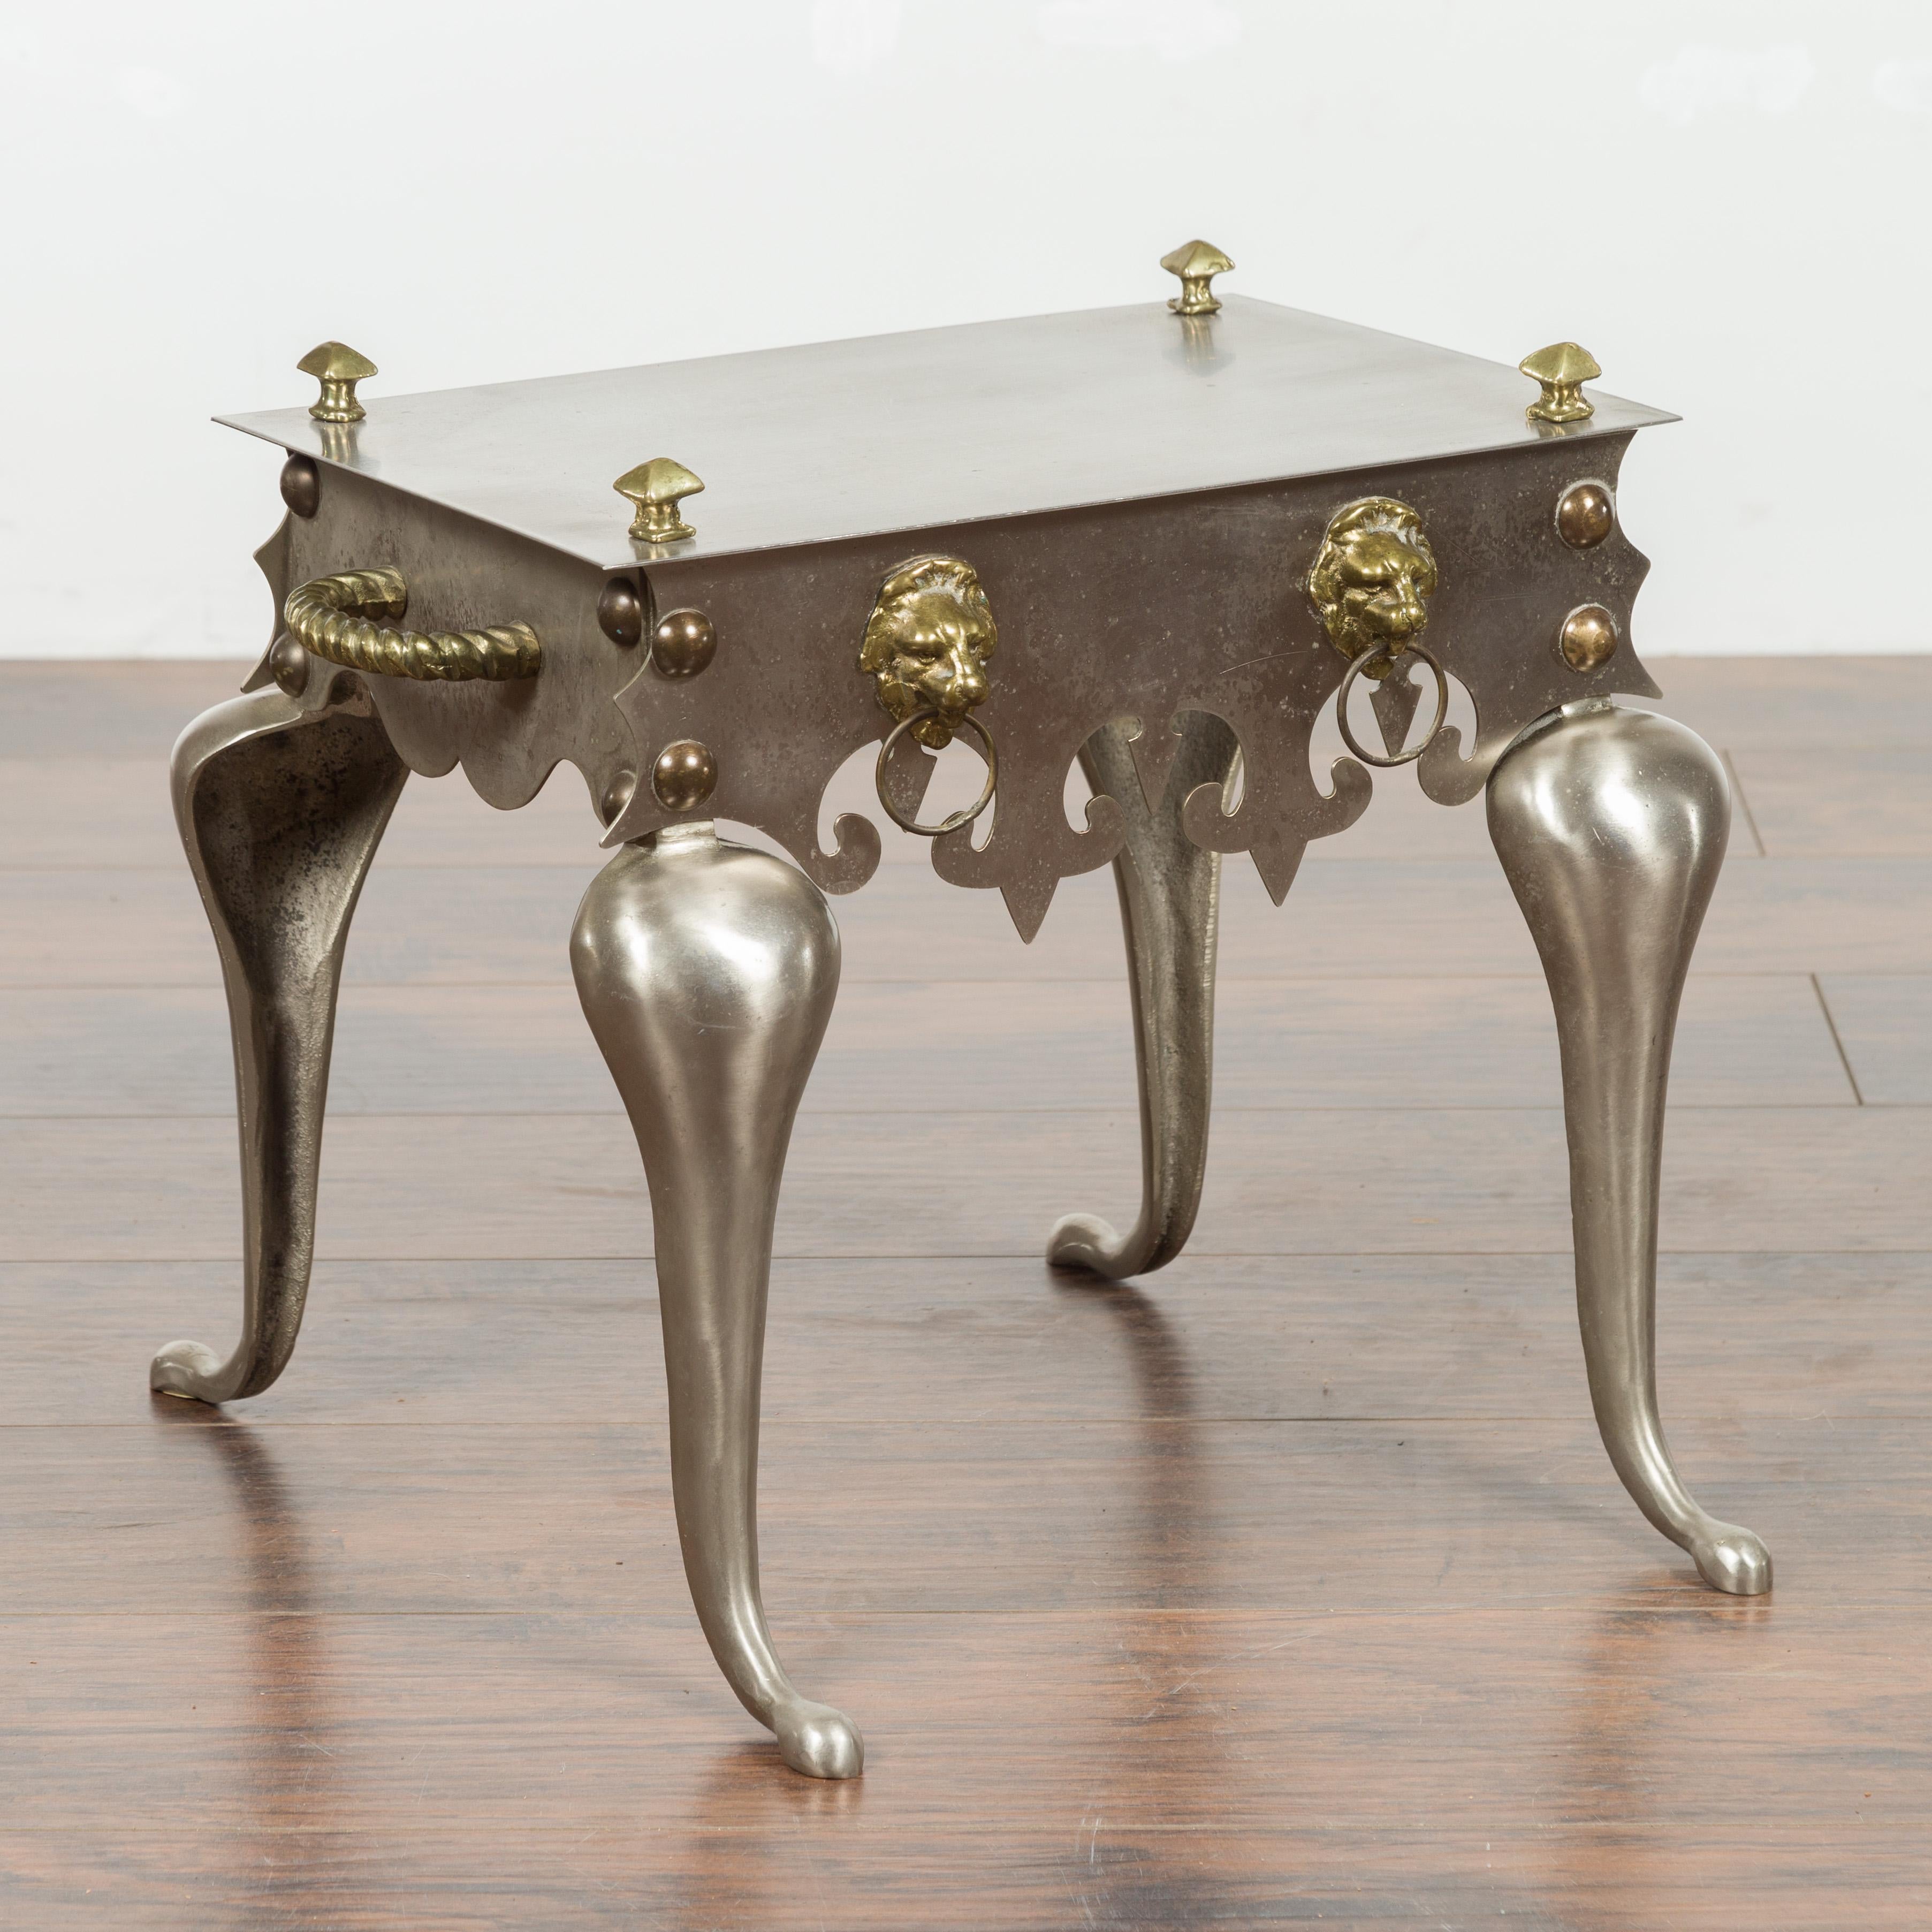 20th Century Small English 1900s Steel and Brass Side Table with Lion Heads and Curving Legs For Sale